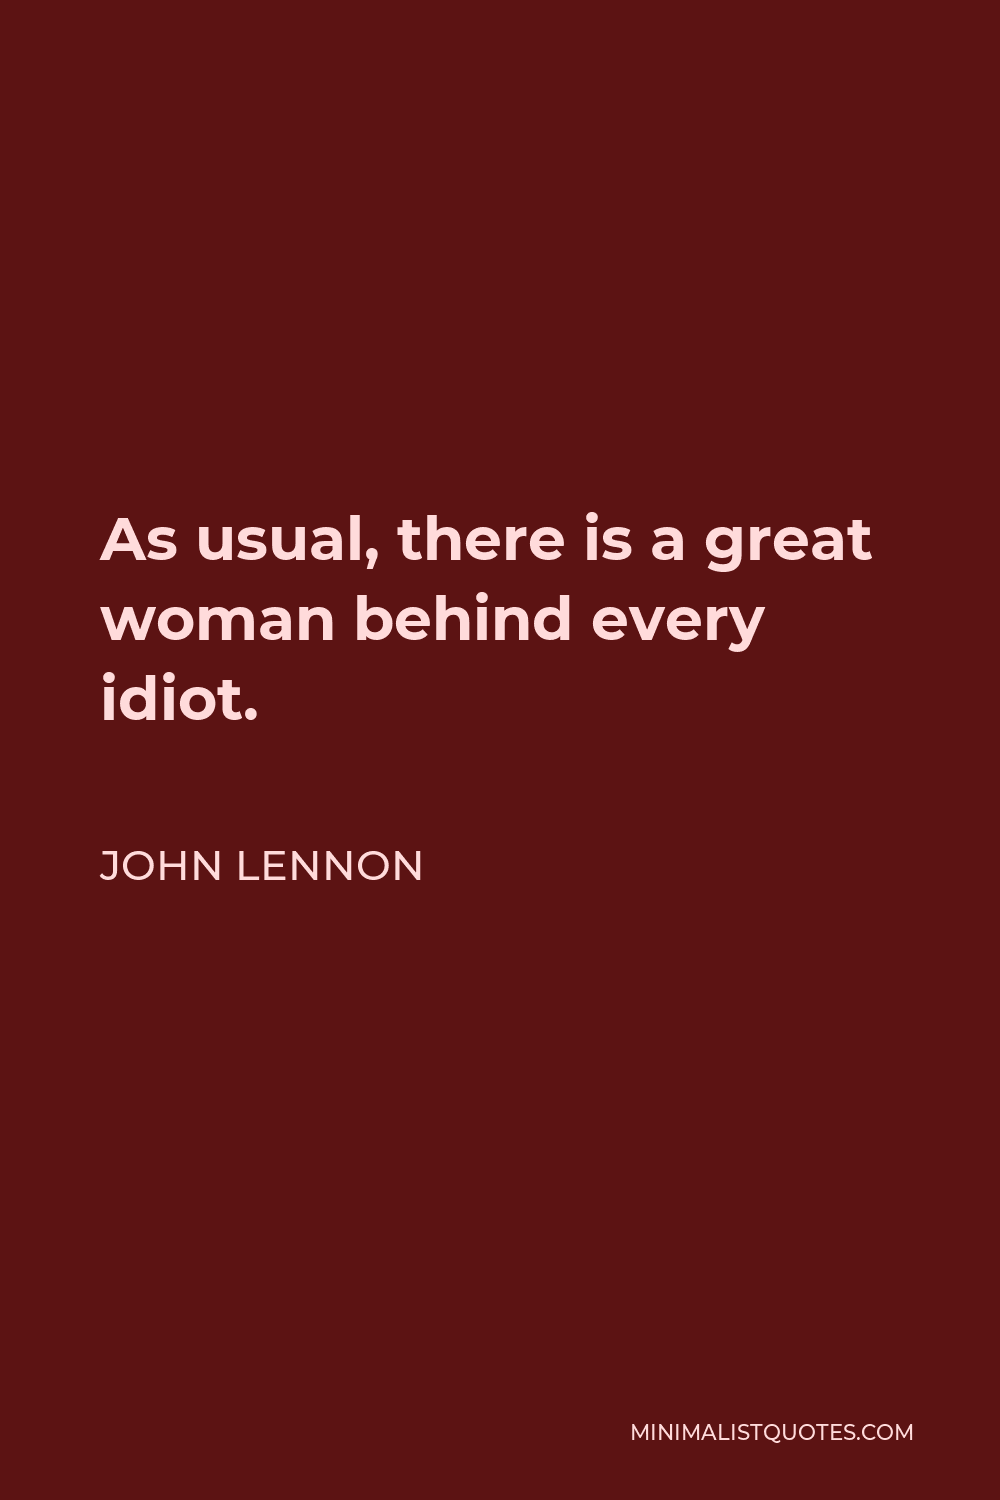 John Lennon Quote - As usual, there is a great woman behind every idiot.